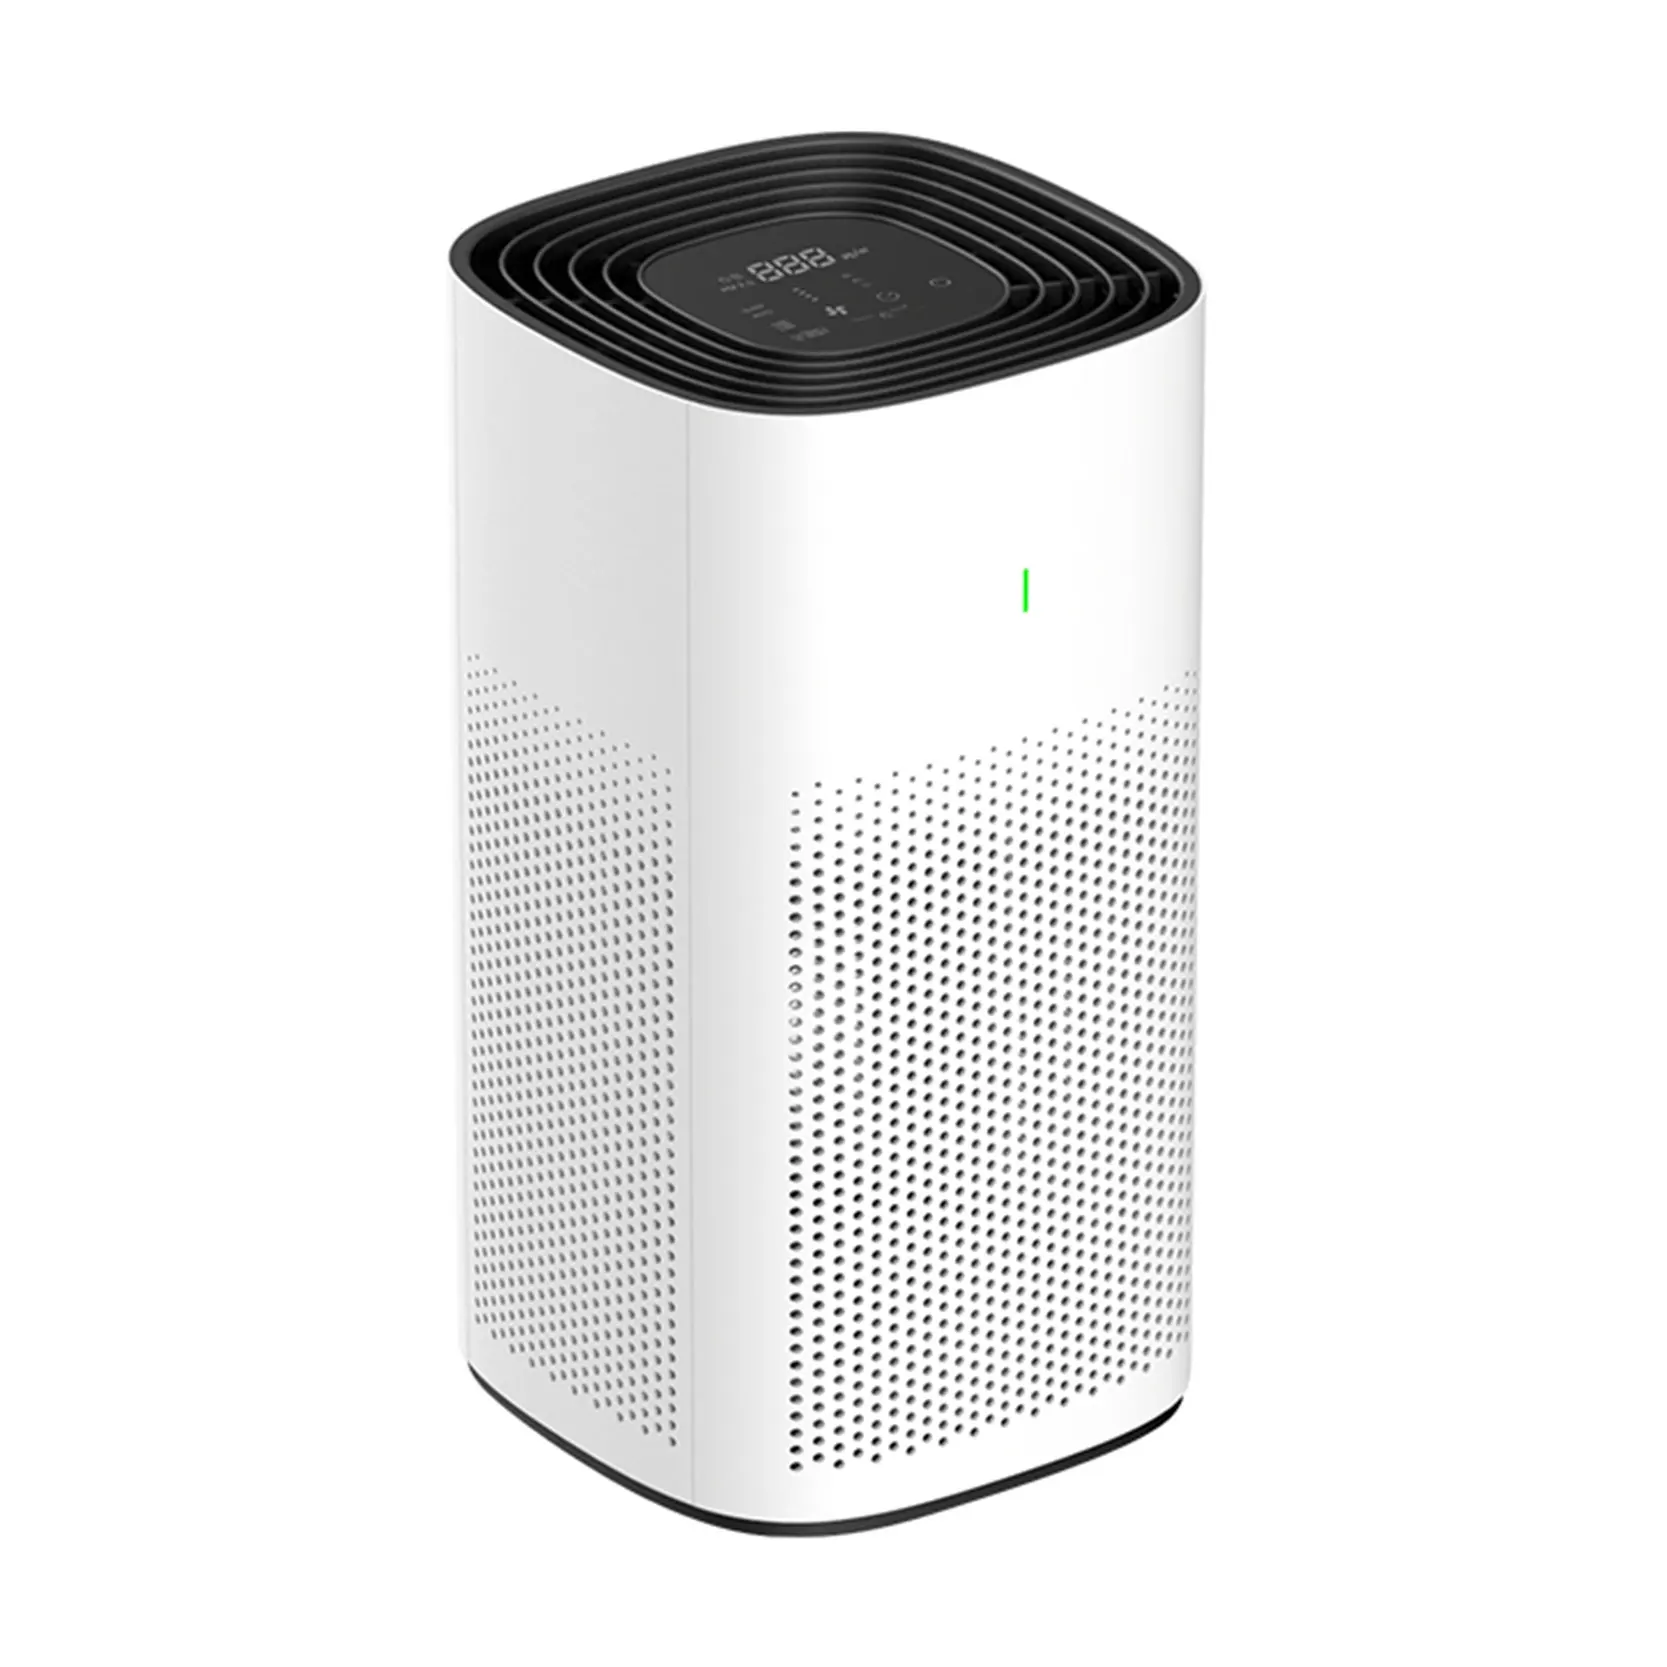 

Air Purifier with H13 True HEPA Filter for Smoke, Dust, Odors, Pet Dander, Quiet 99.9% Removal to 0.1 Microns